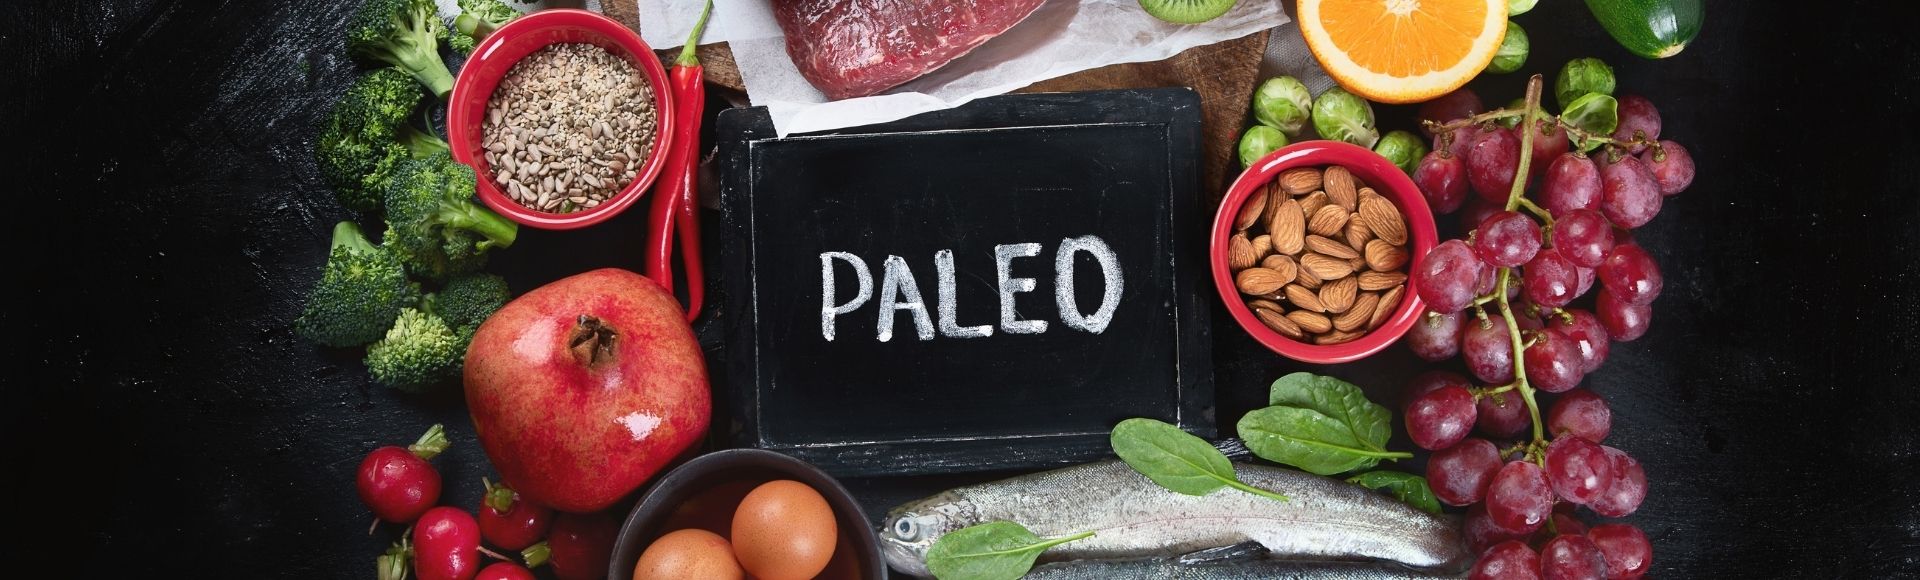 Paleo Lifestyle - What are the Benefits of Paleo Lifestyle - Kevin's  Natural Foods